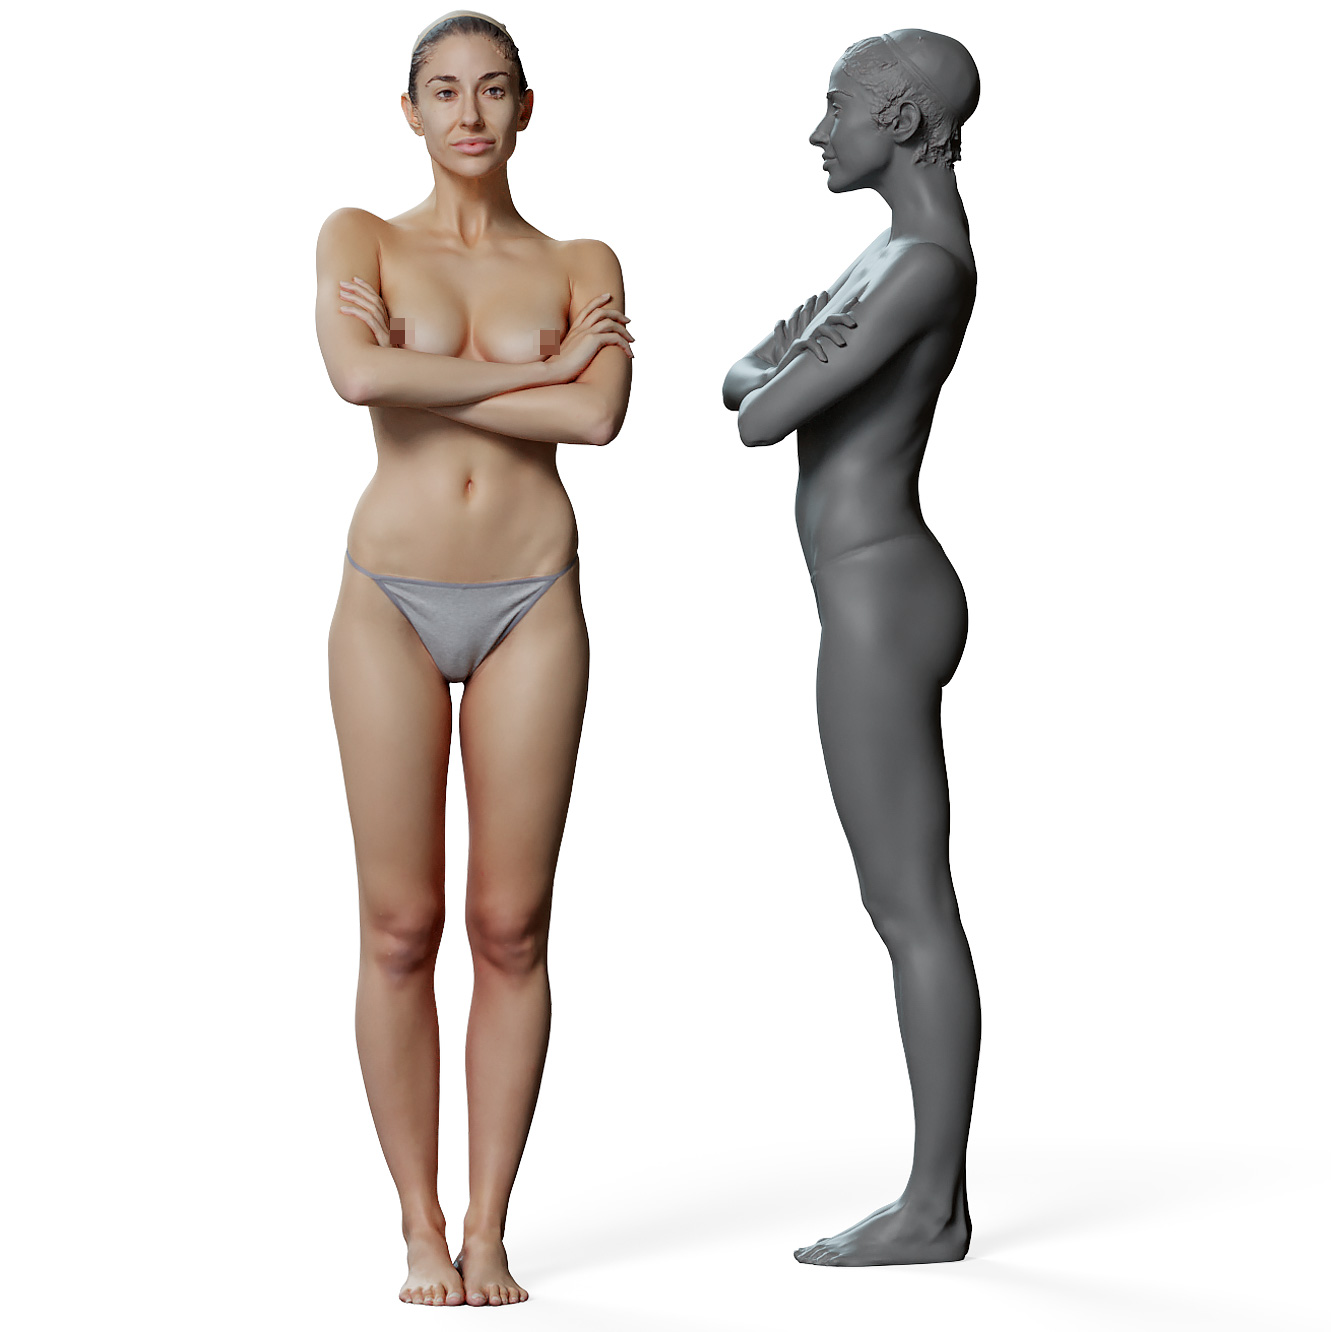  Action Figures Body - Models for Artists from Art